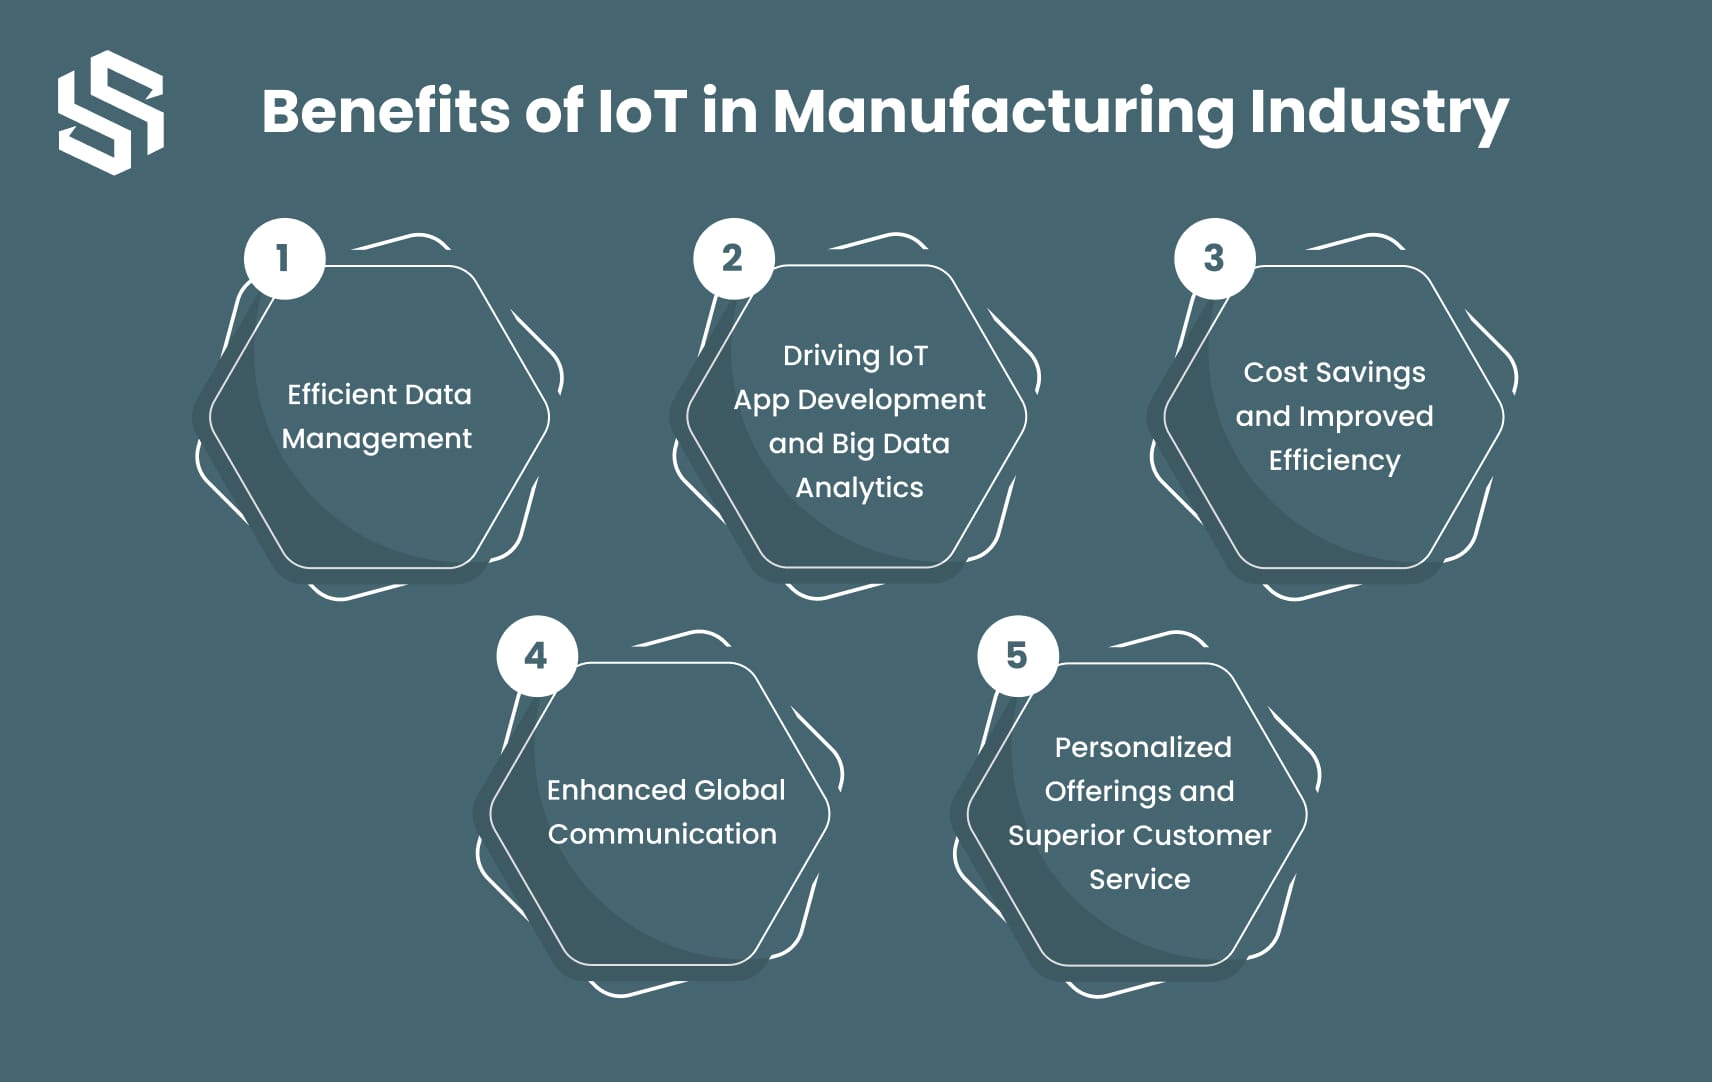 Benefits of IoT in Manufacturing Industry